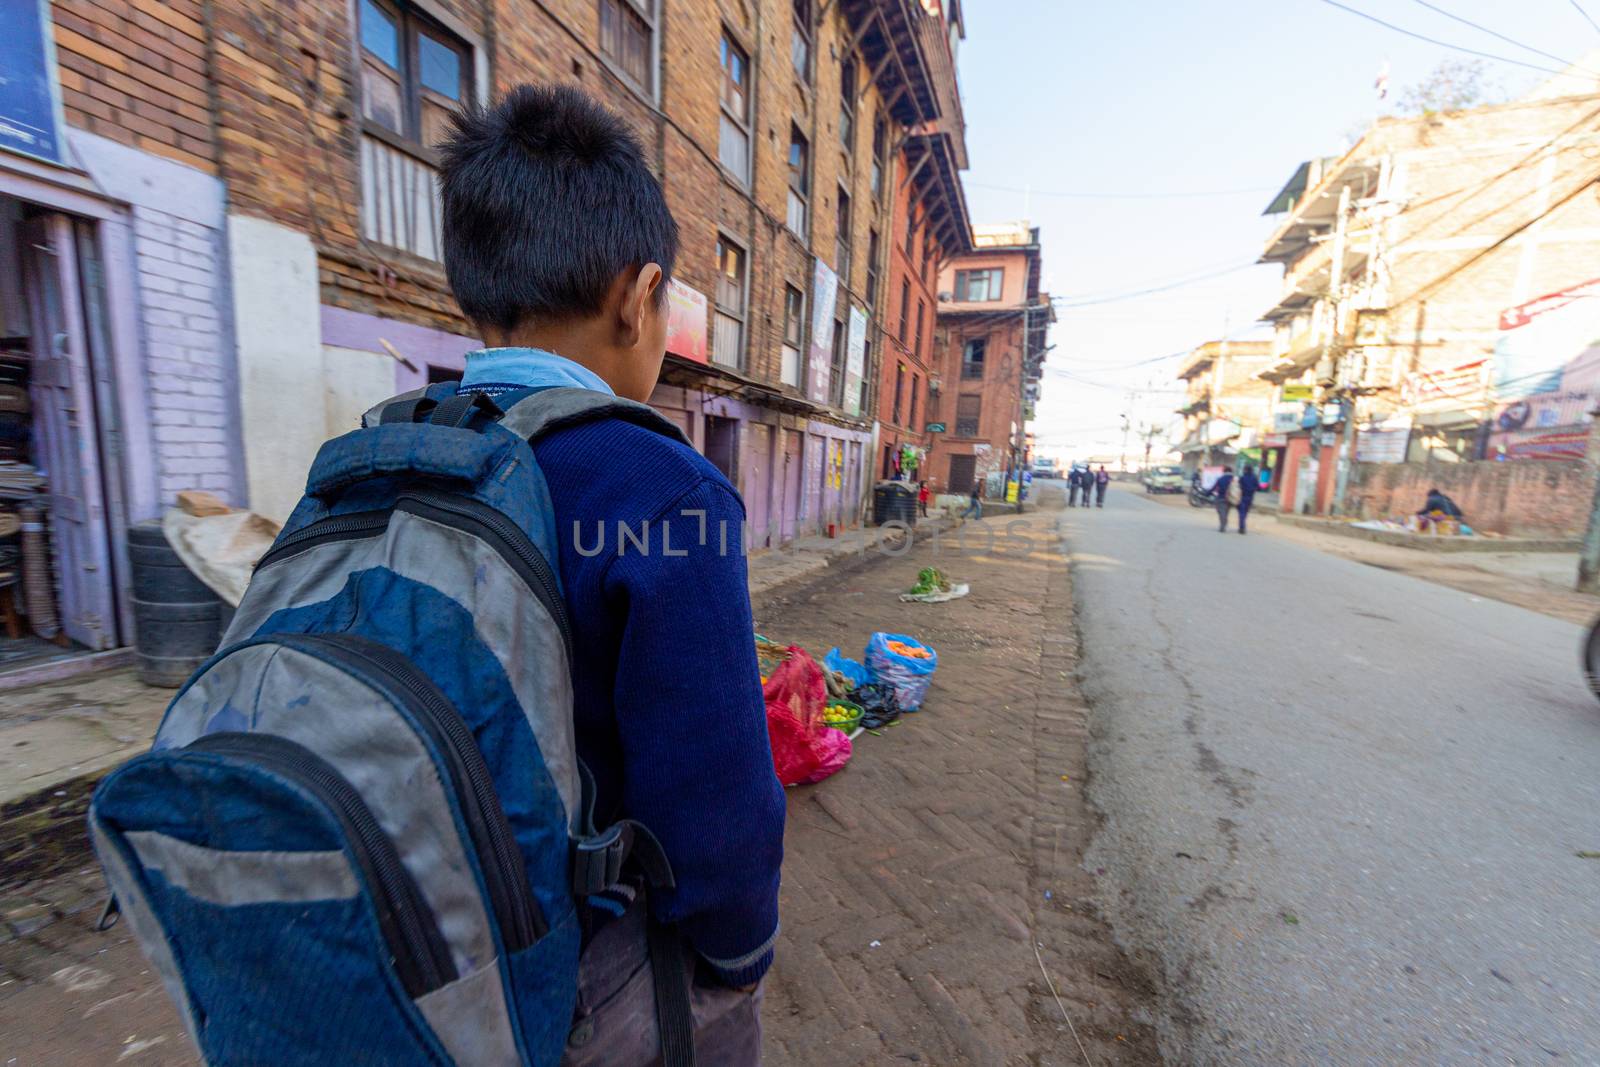 Kathmandu, Nepal - CIRCA 2020: Nepal, Kathmandu kid walking on an unpaved street to school with his back pack in the back. Concept of poverty schooling. by dugulan